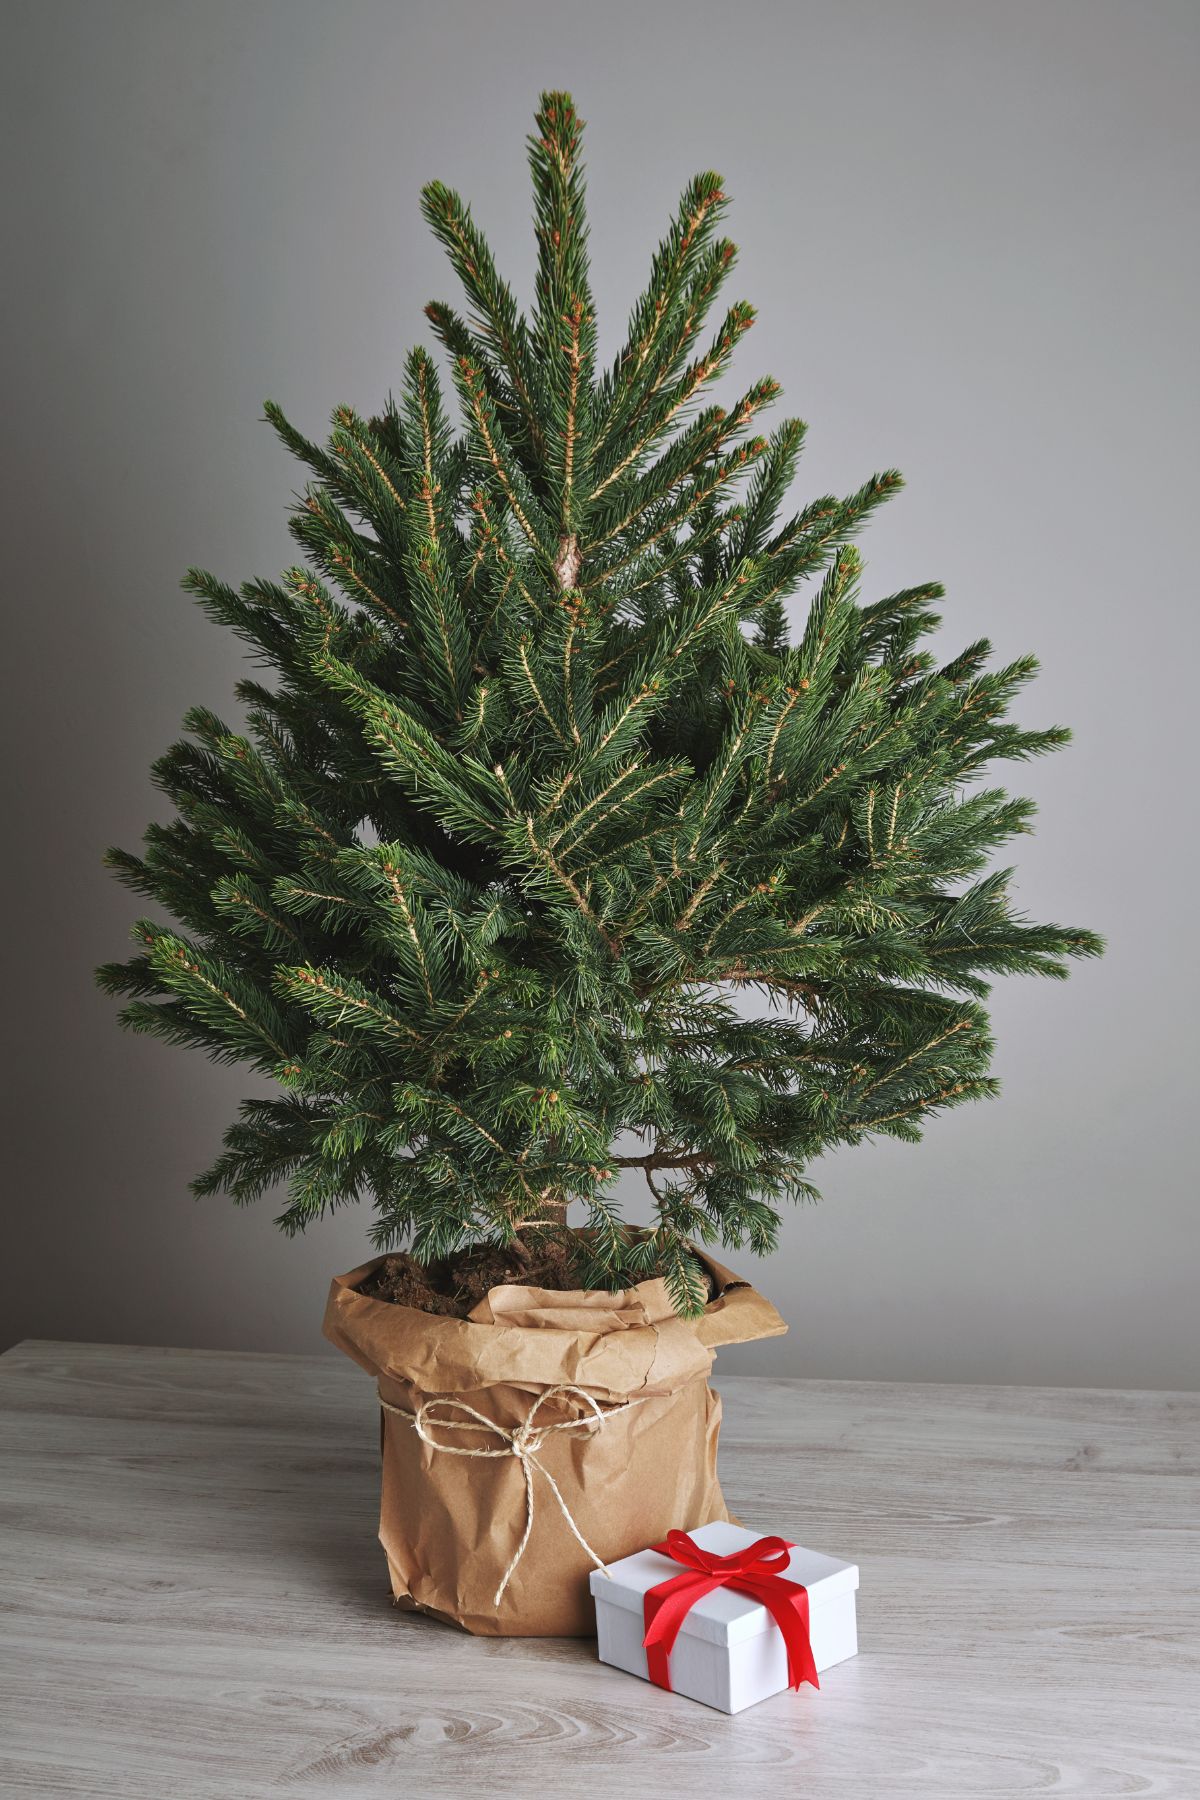 A potted Christmas tree with a gift